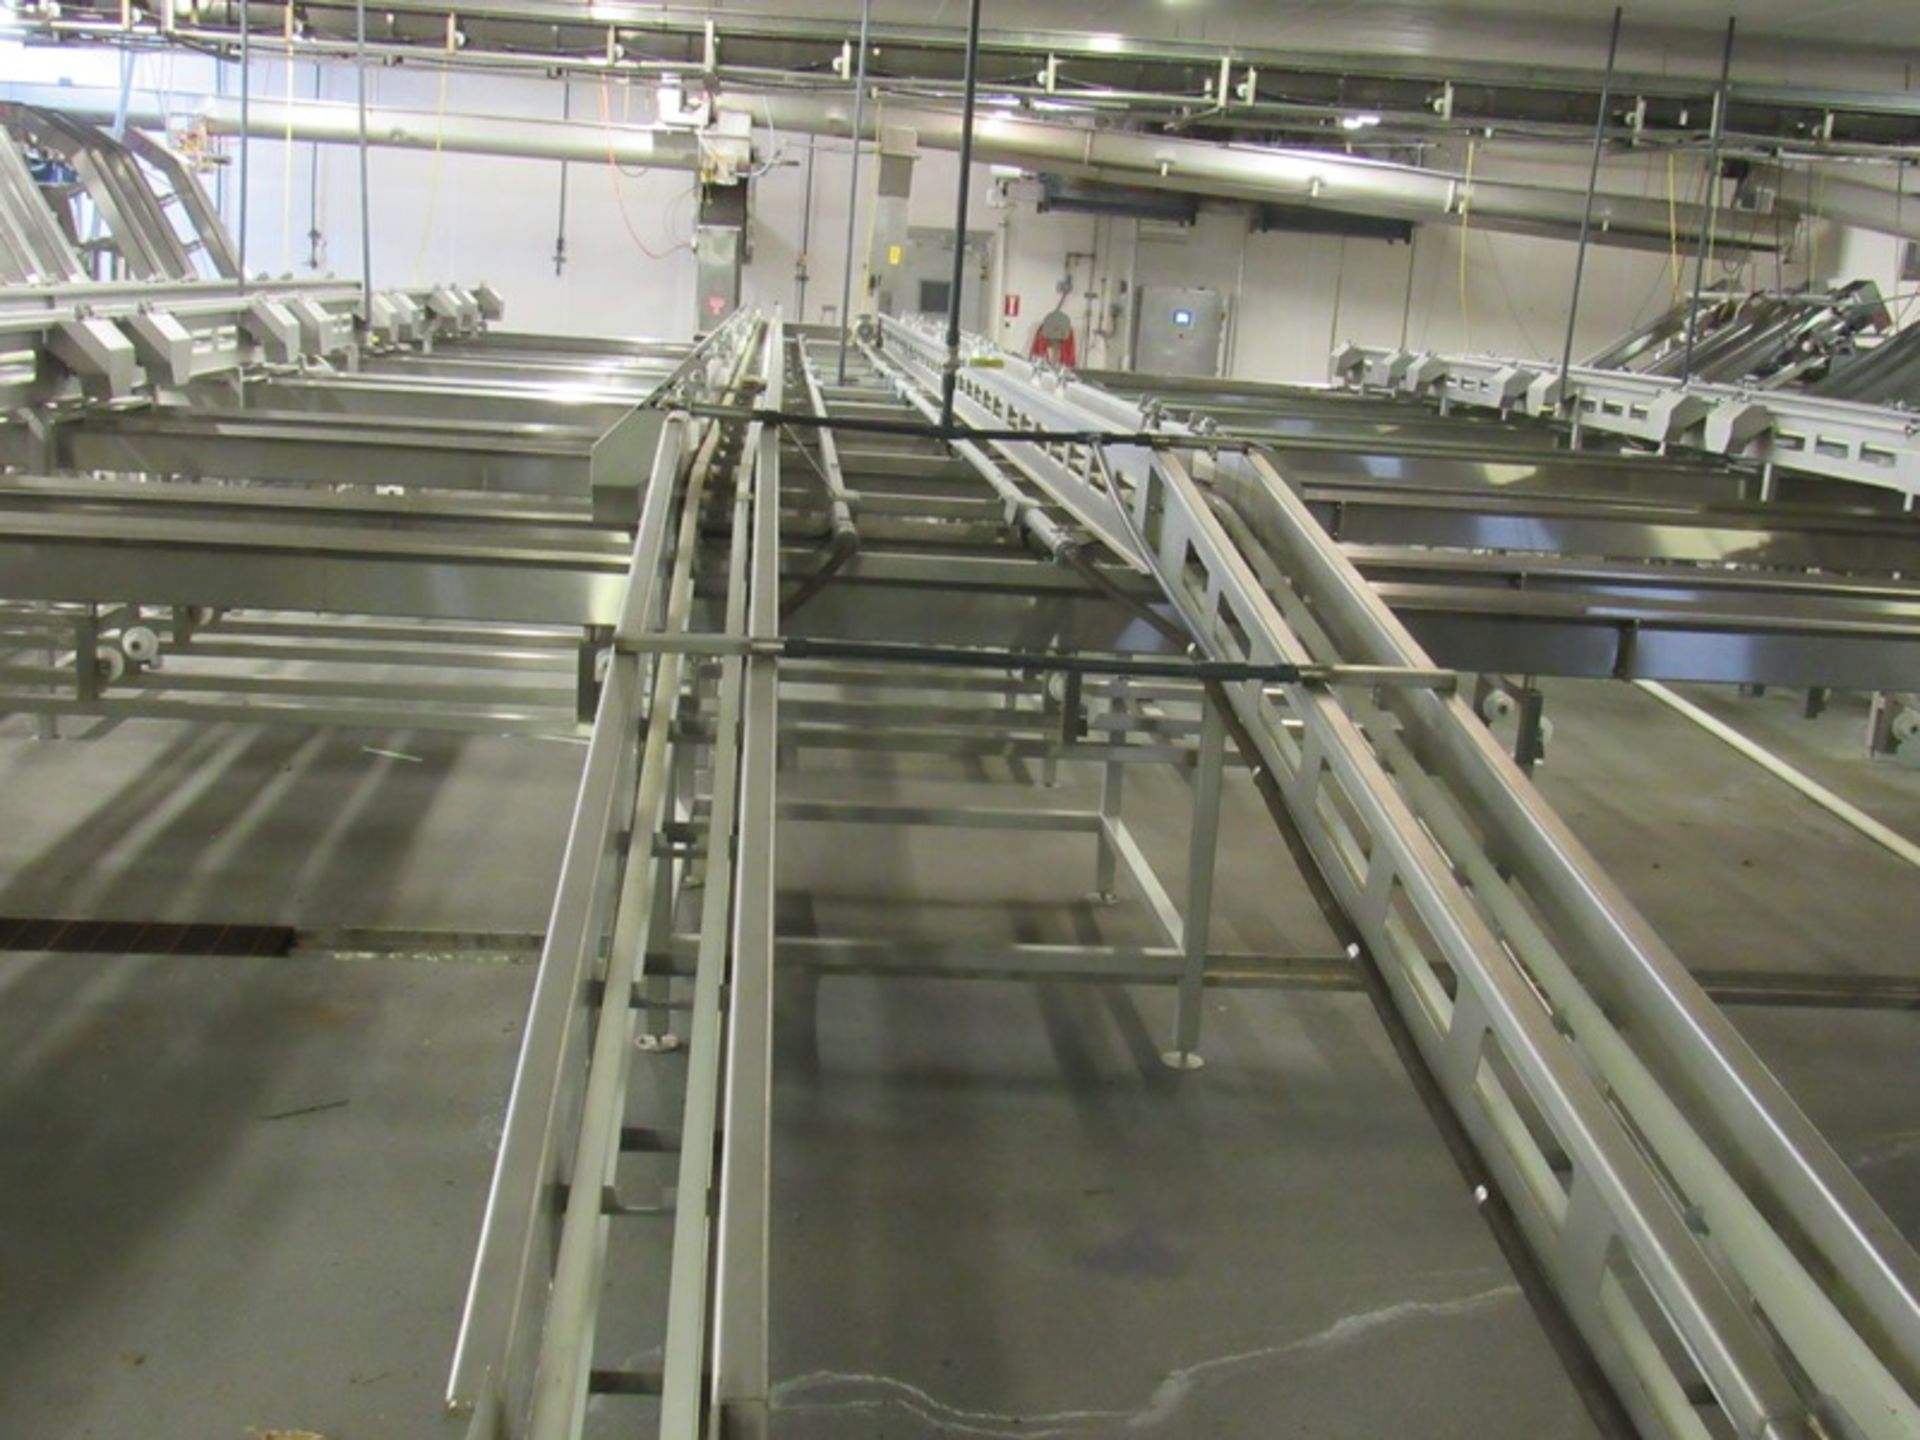 C.A.T. Stainless Steel Grading Line, dual lanes, 10 positions per lane, pneumatic drop chutes, - Image 6 of 15